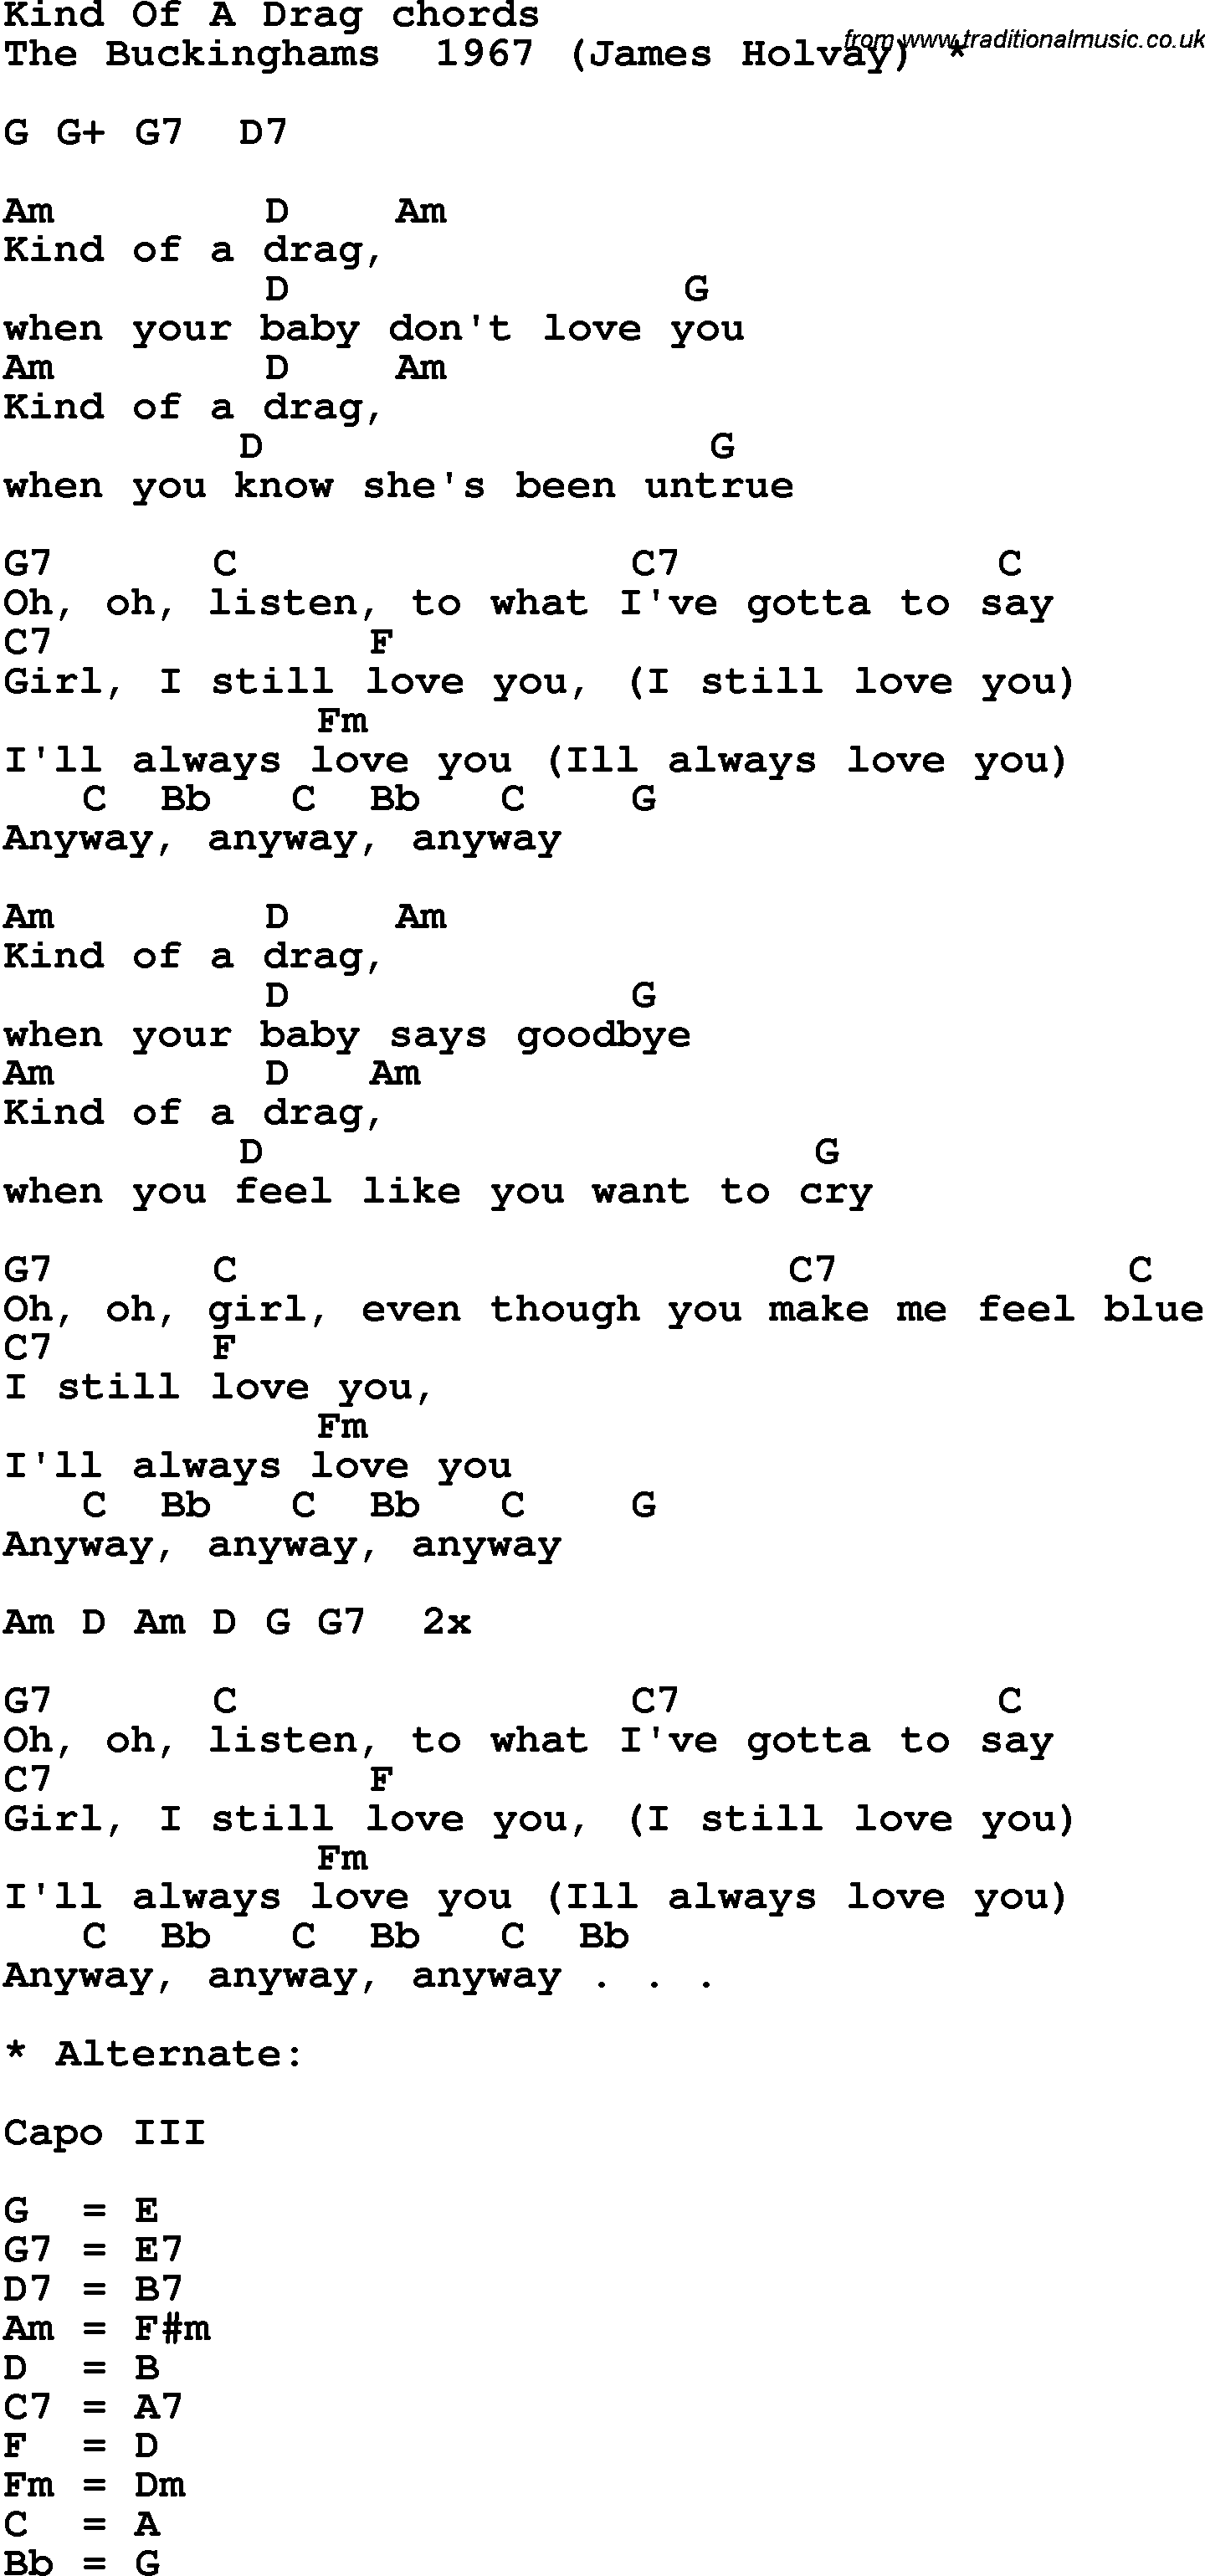 Song Lyrics with guitar chords for Kind Of A Drag